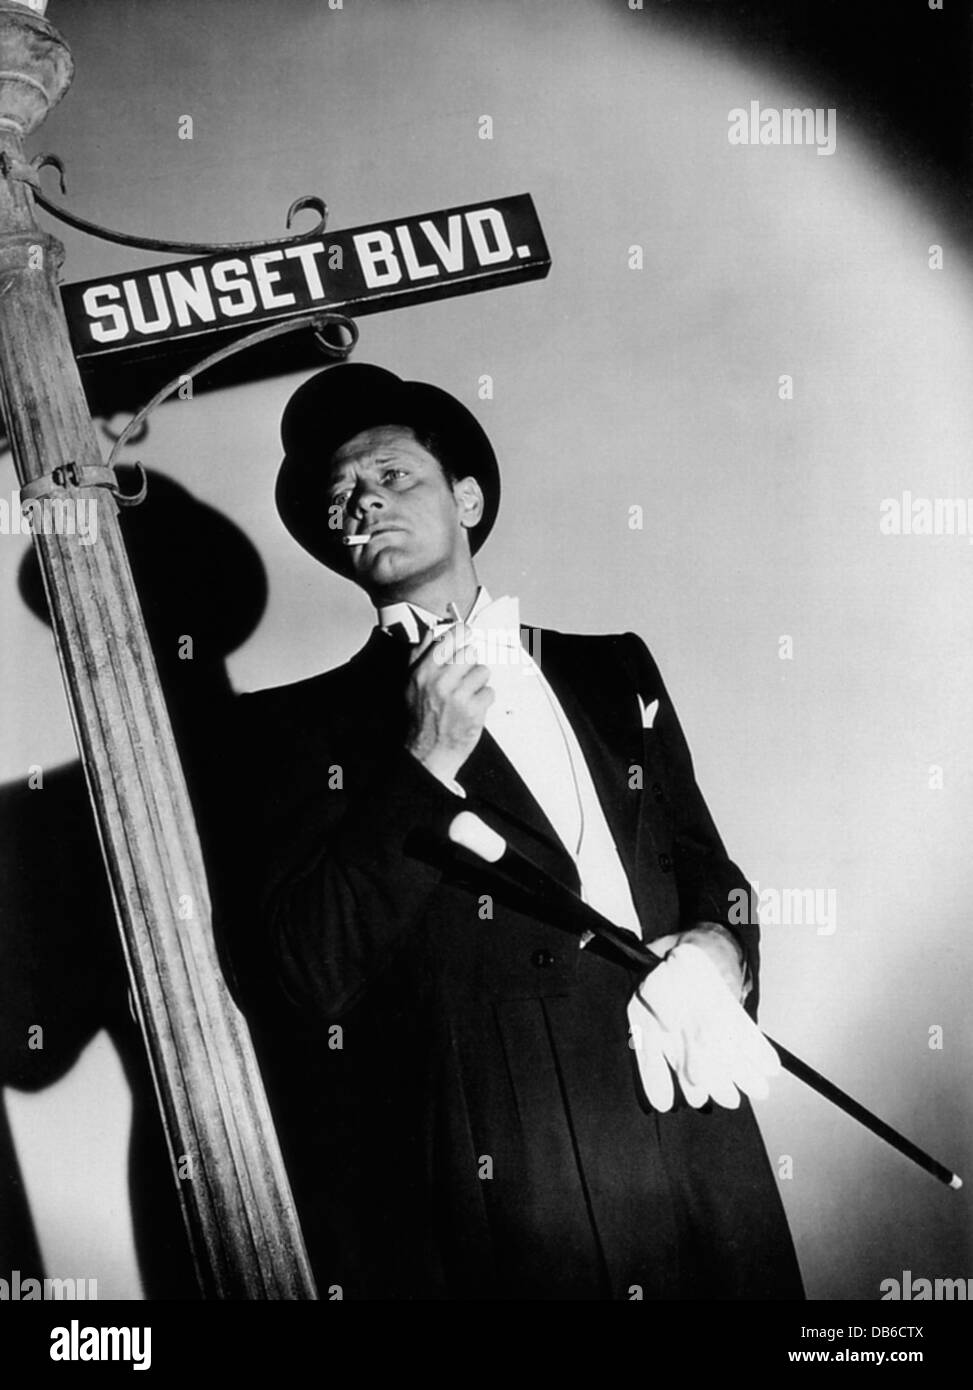 SUNSET BOULEVARD Paramount, 1950. Directed by Billy Wilder. With William Holden Stock Photo